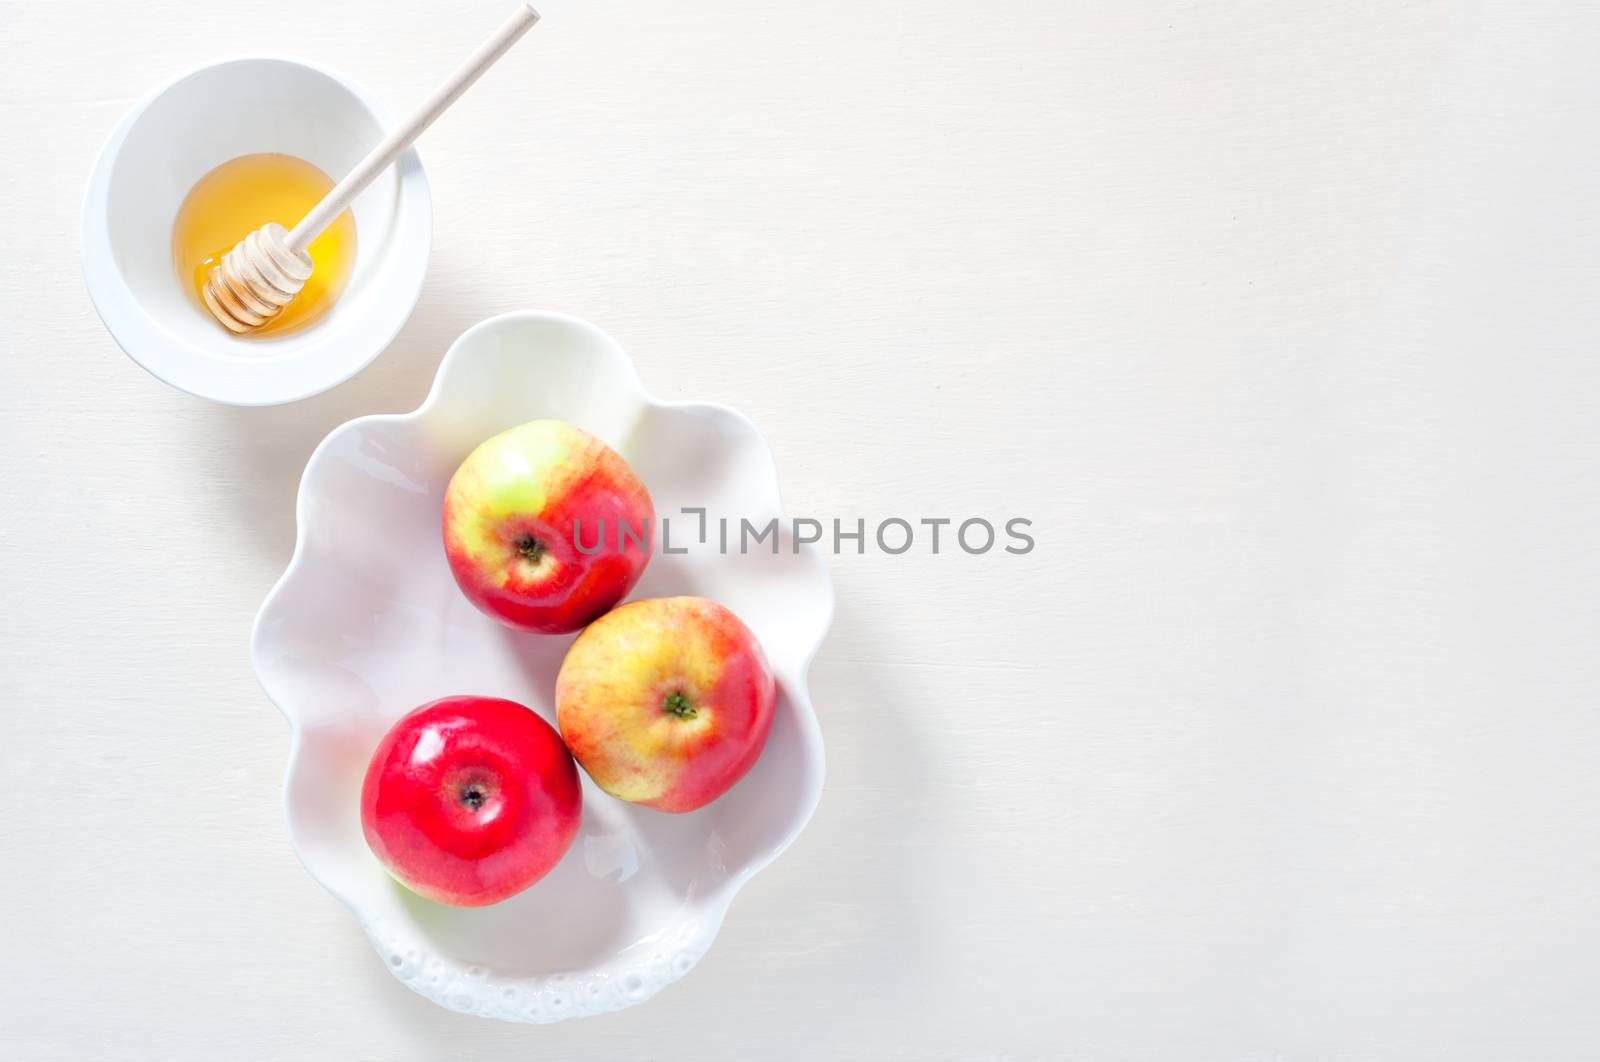 Apples, pomegranate and honey for Rosh Hashanah by supercat67